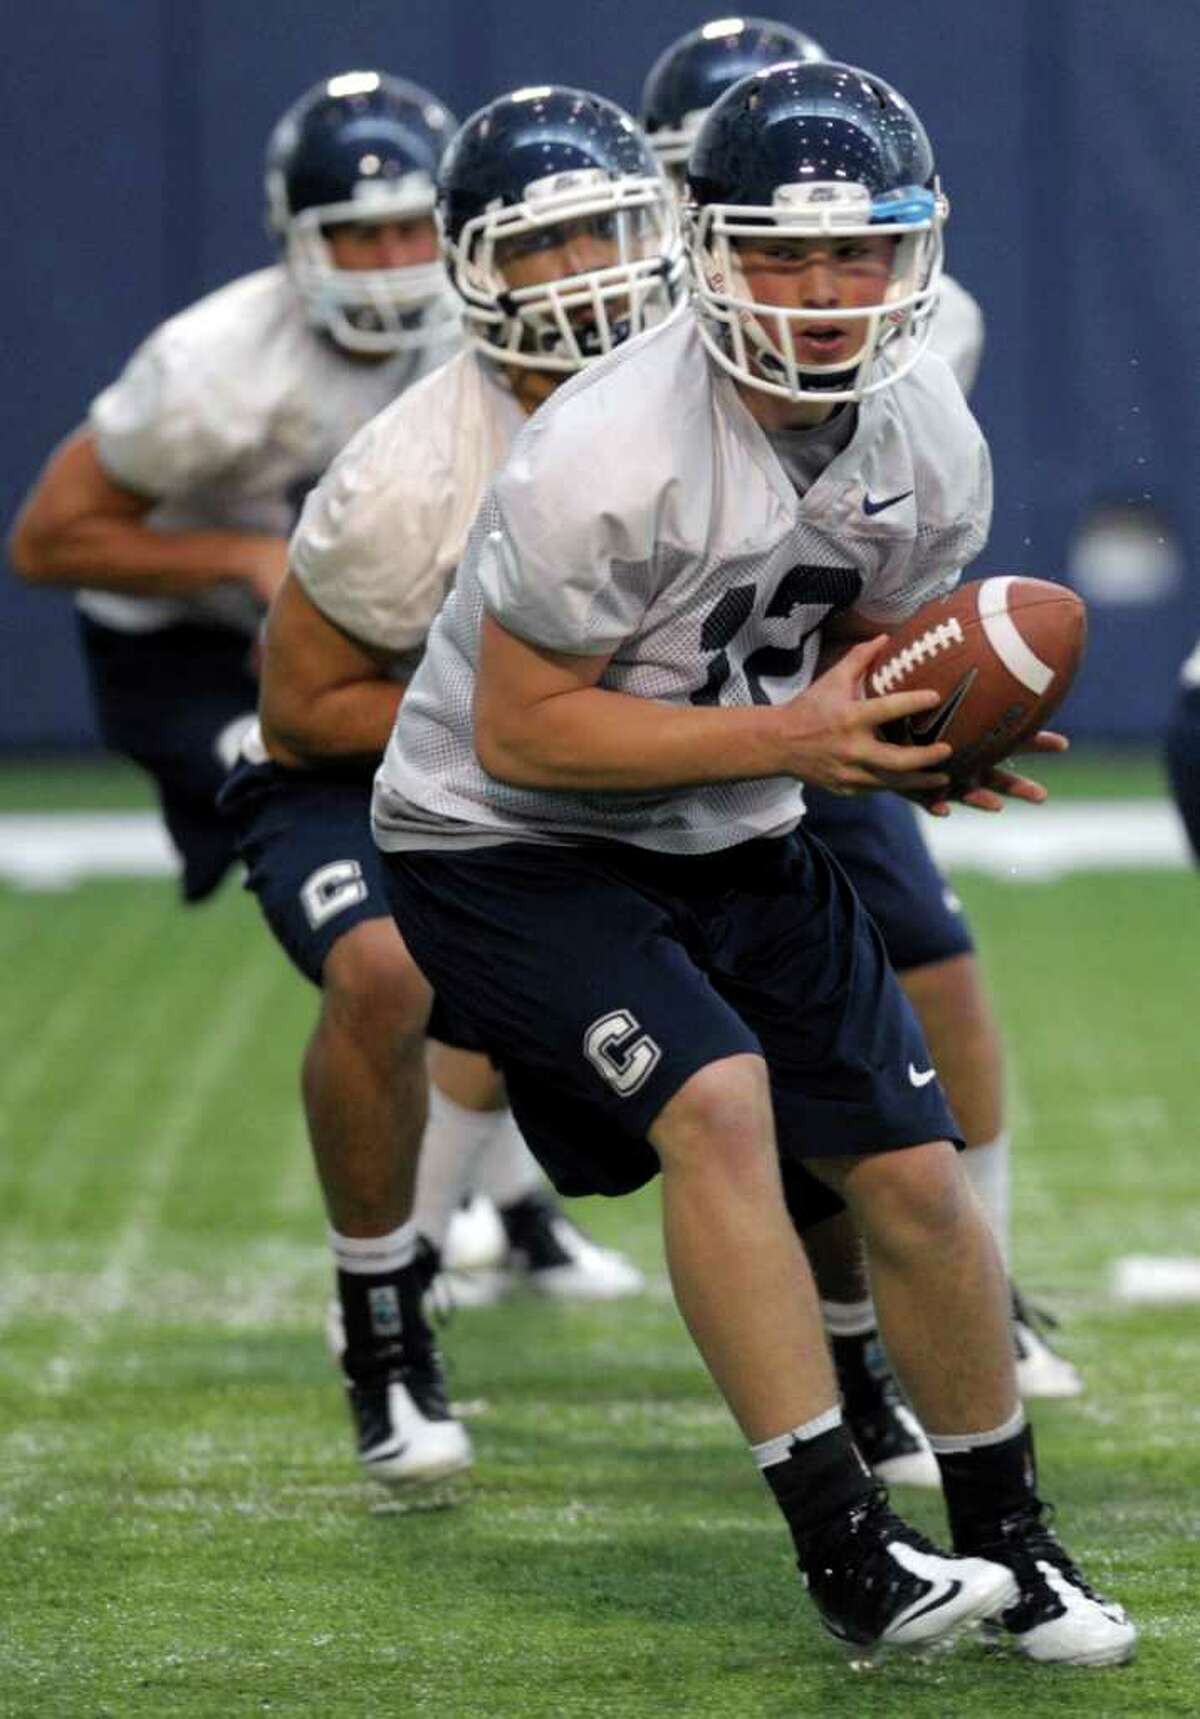 Connecticut quarterback Casey Cochran (12) runs a drill during the first day of the team's spring NCAA college football practice, Tuesday, March 20, 2012, in Storrs, Conn. (AP Photo/Sean D. Elliot,The Day) MANDATORY CREDIT: SEAN D. ELLIOT/THE DAY